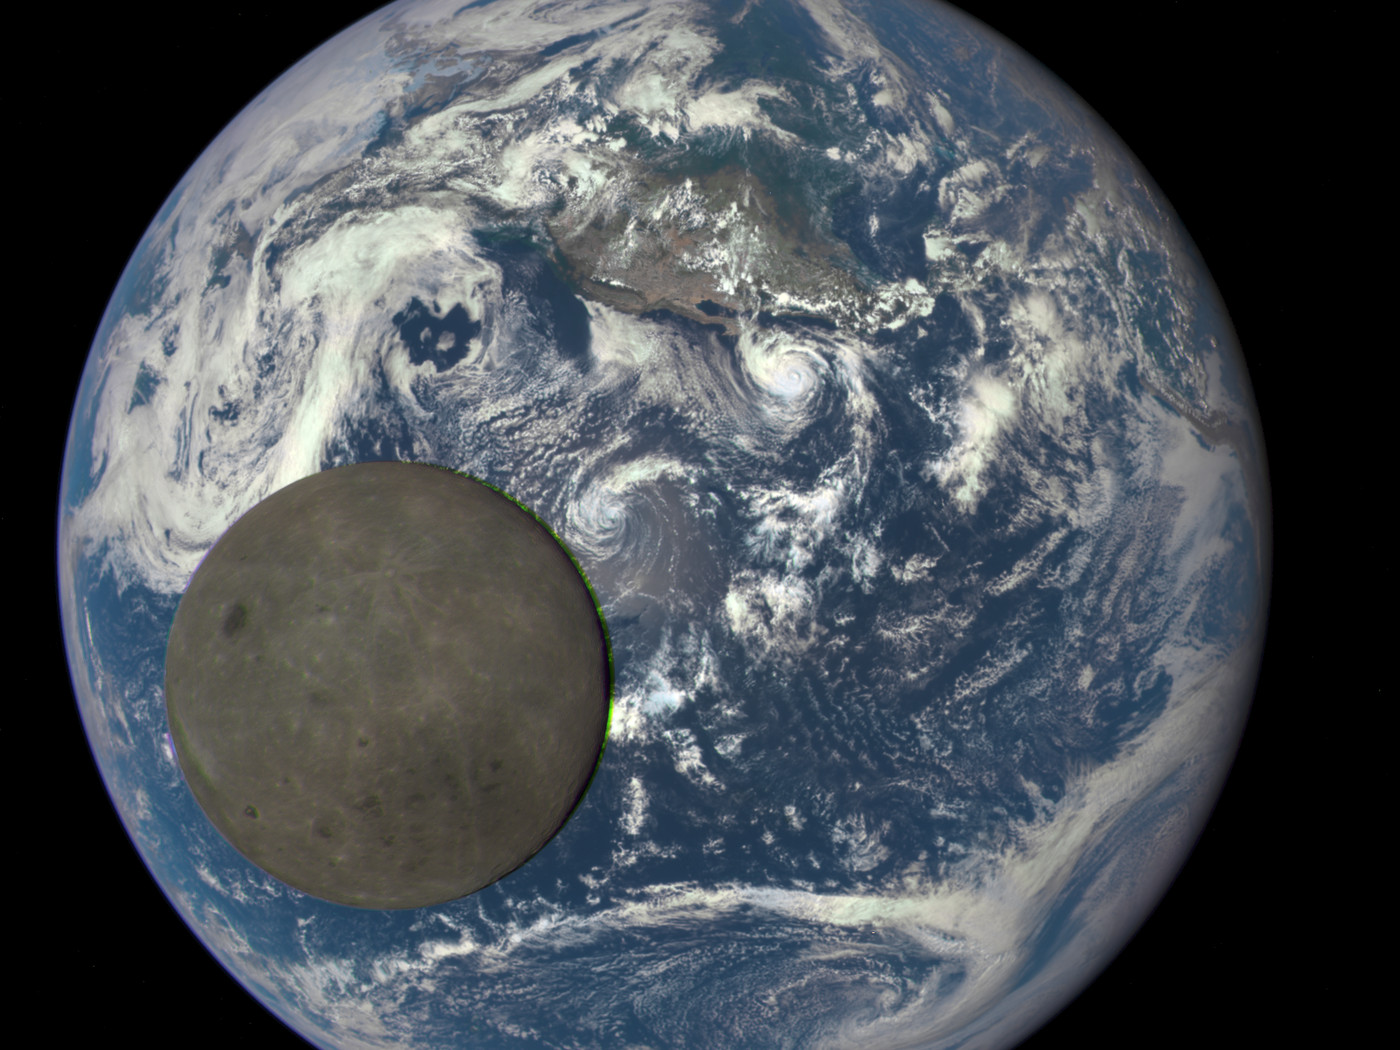 That Moon And Earth Gif Is Totally Real Debunking S